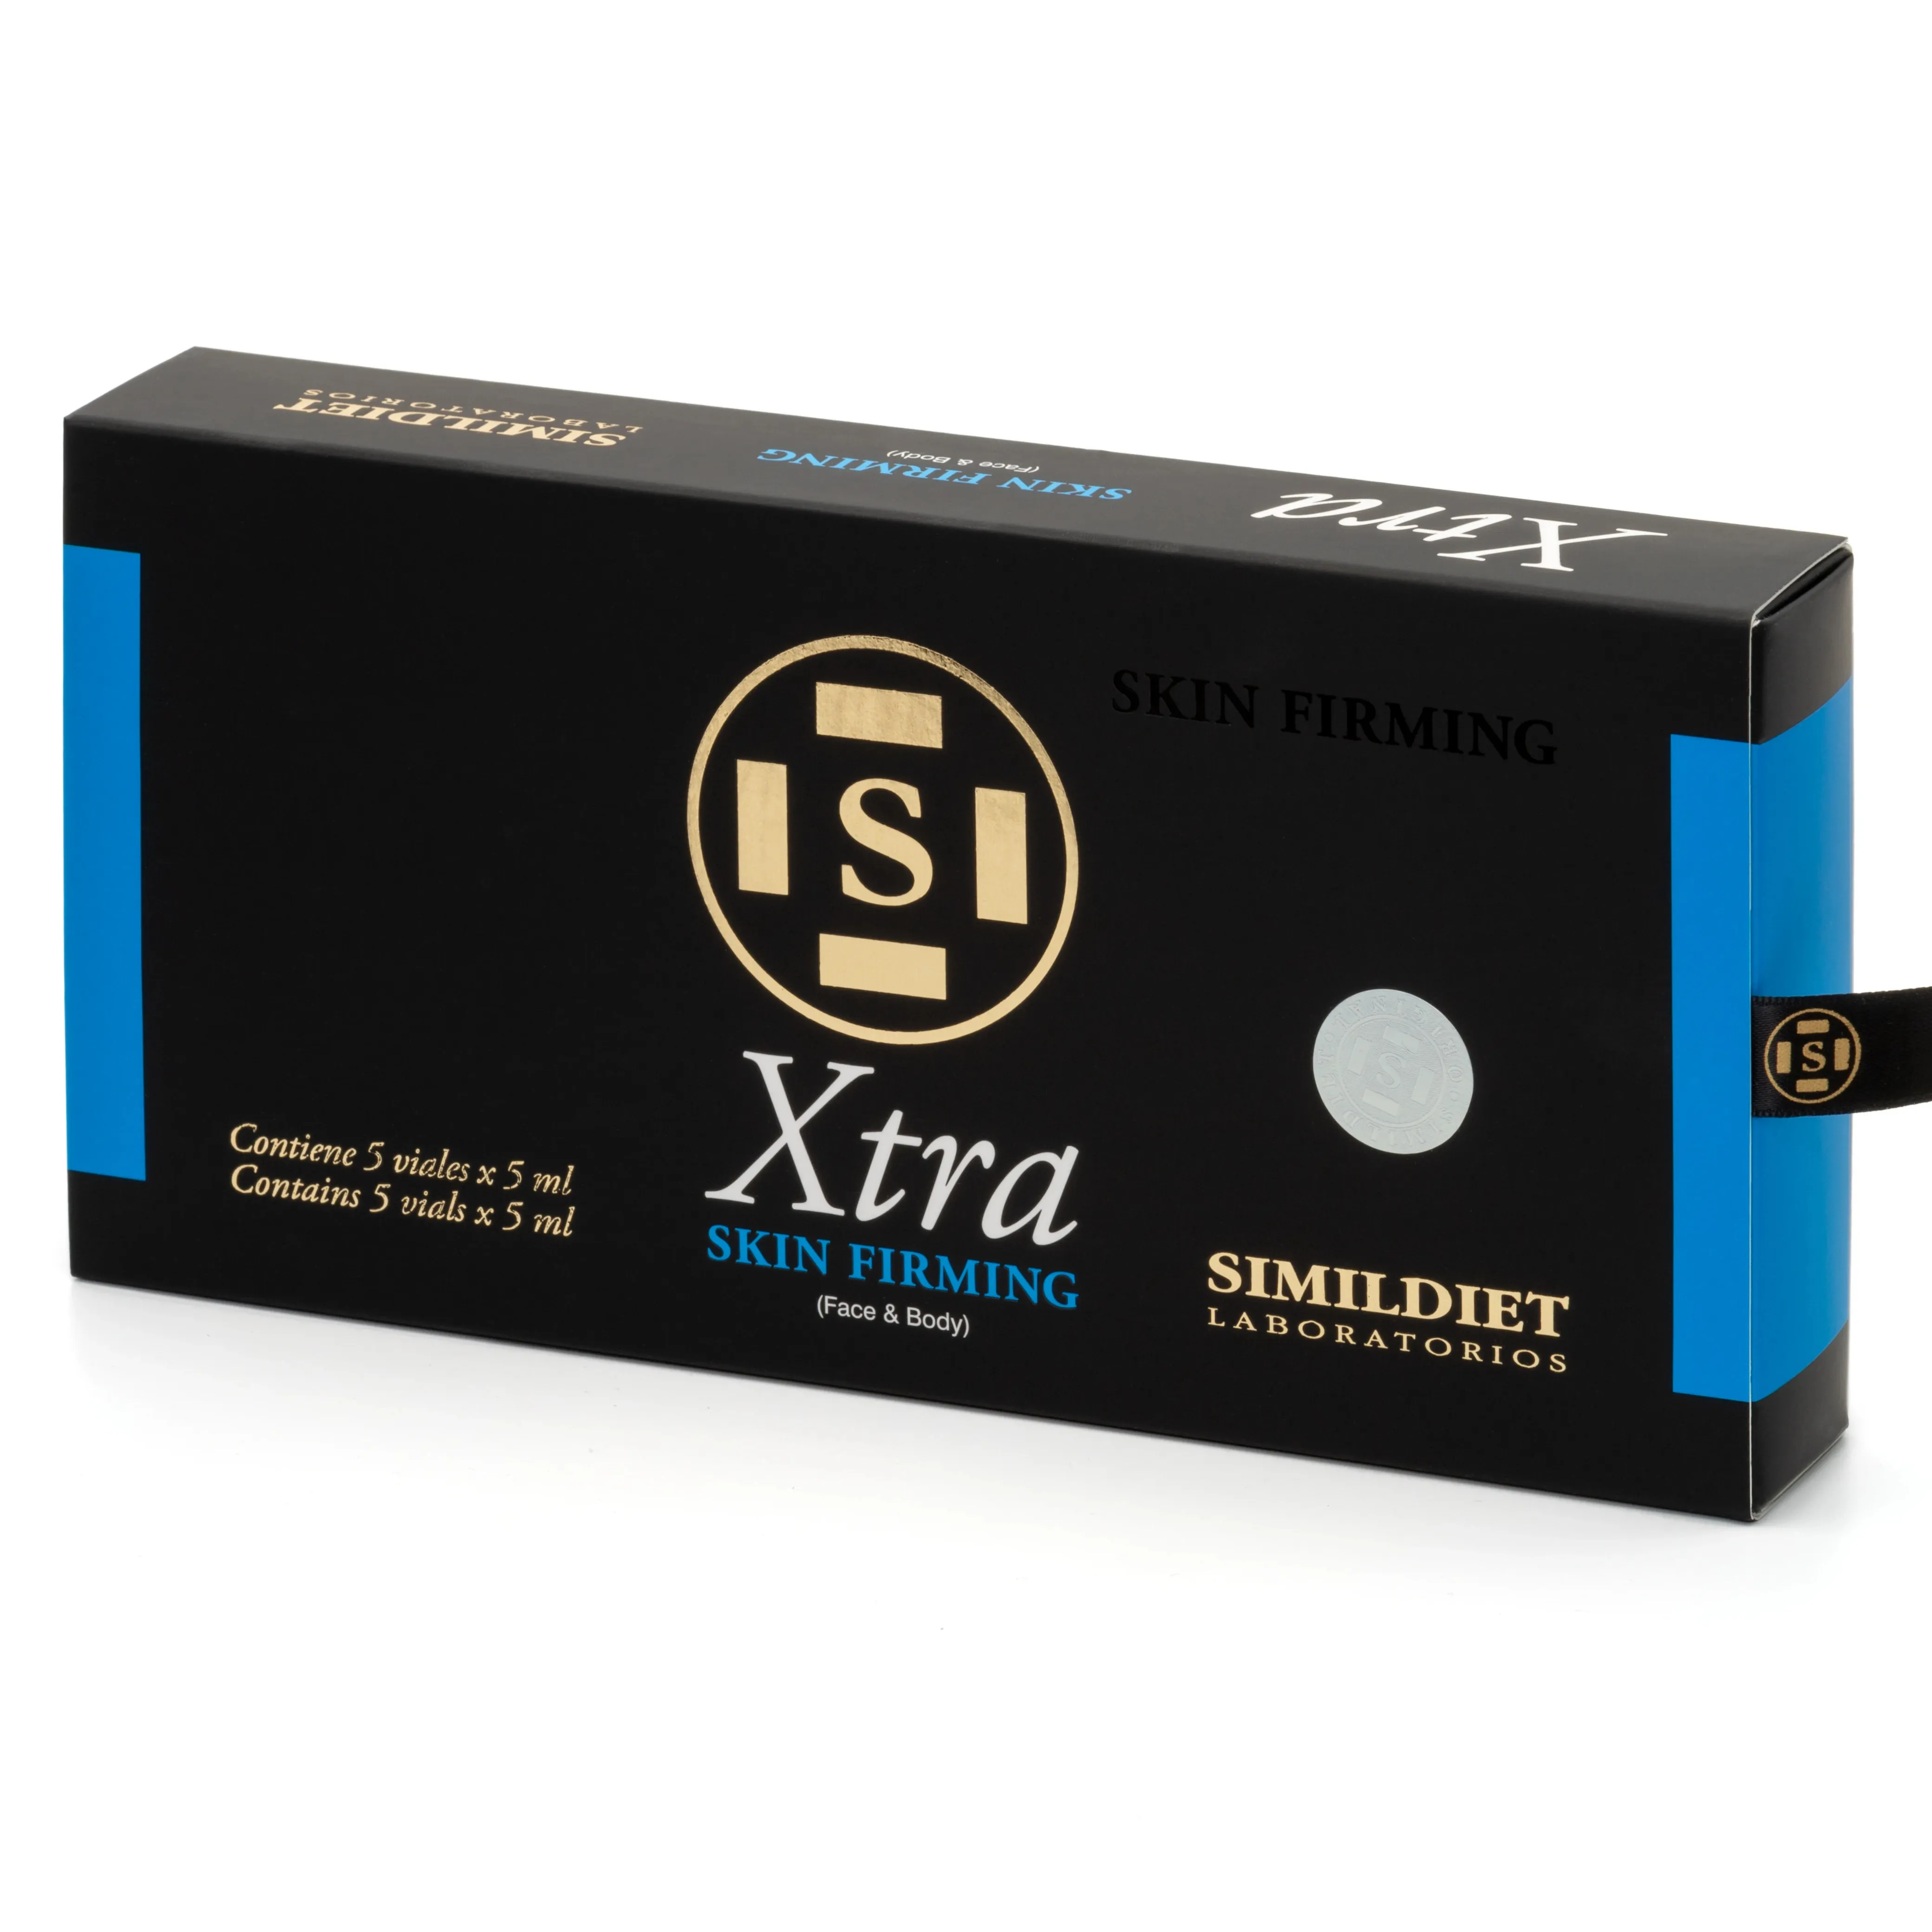 SIMILDIET XTRA SKIN FIRMING vials Spanish High Quality for lifting firming treatment body and face saggy skin